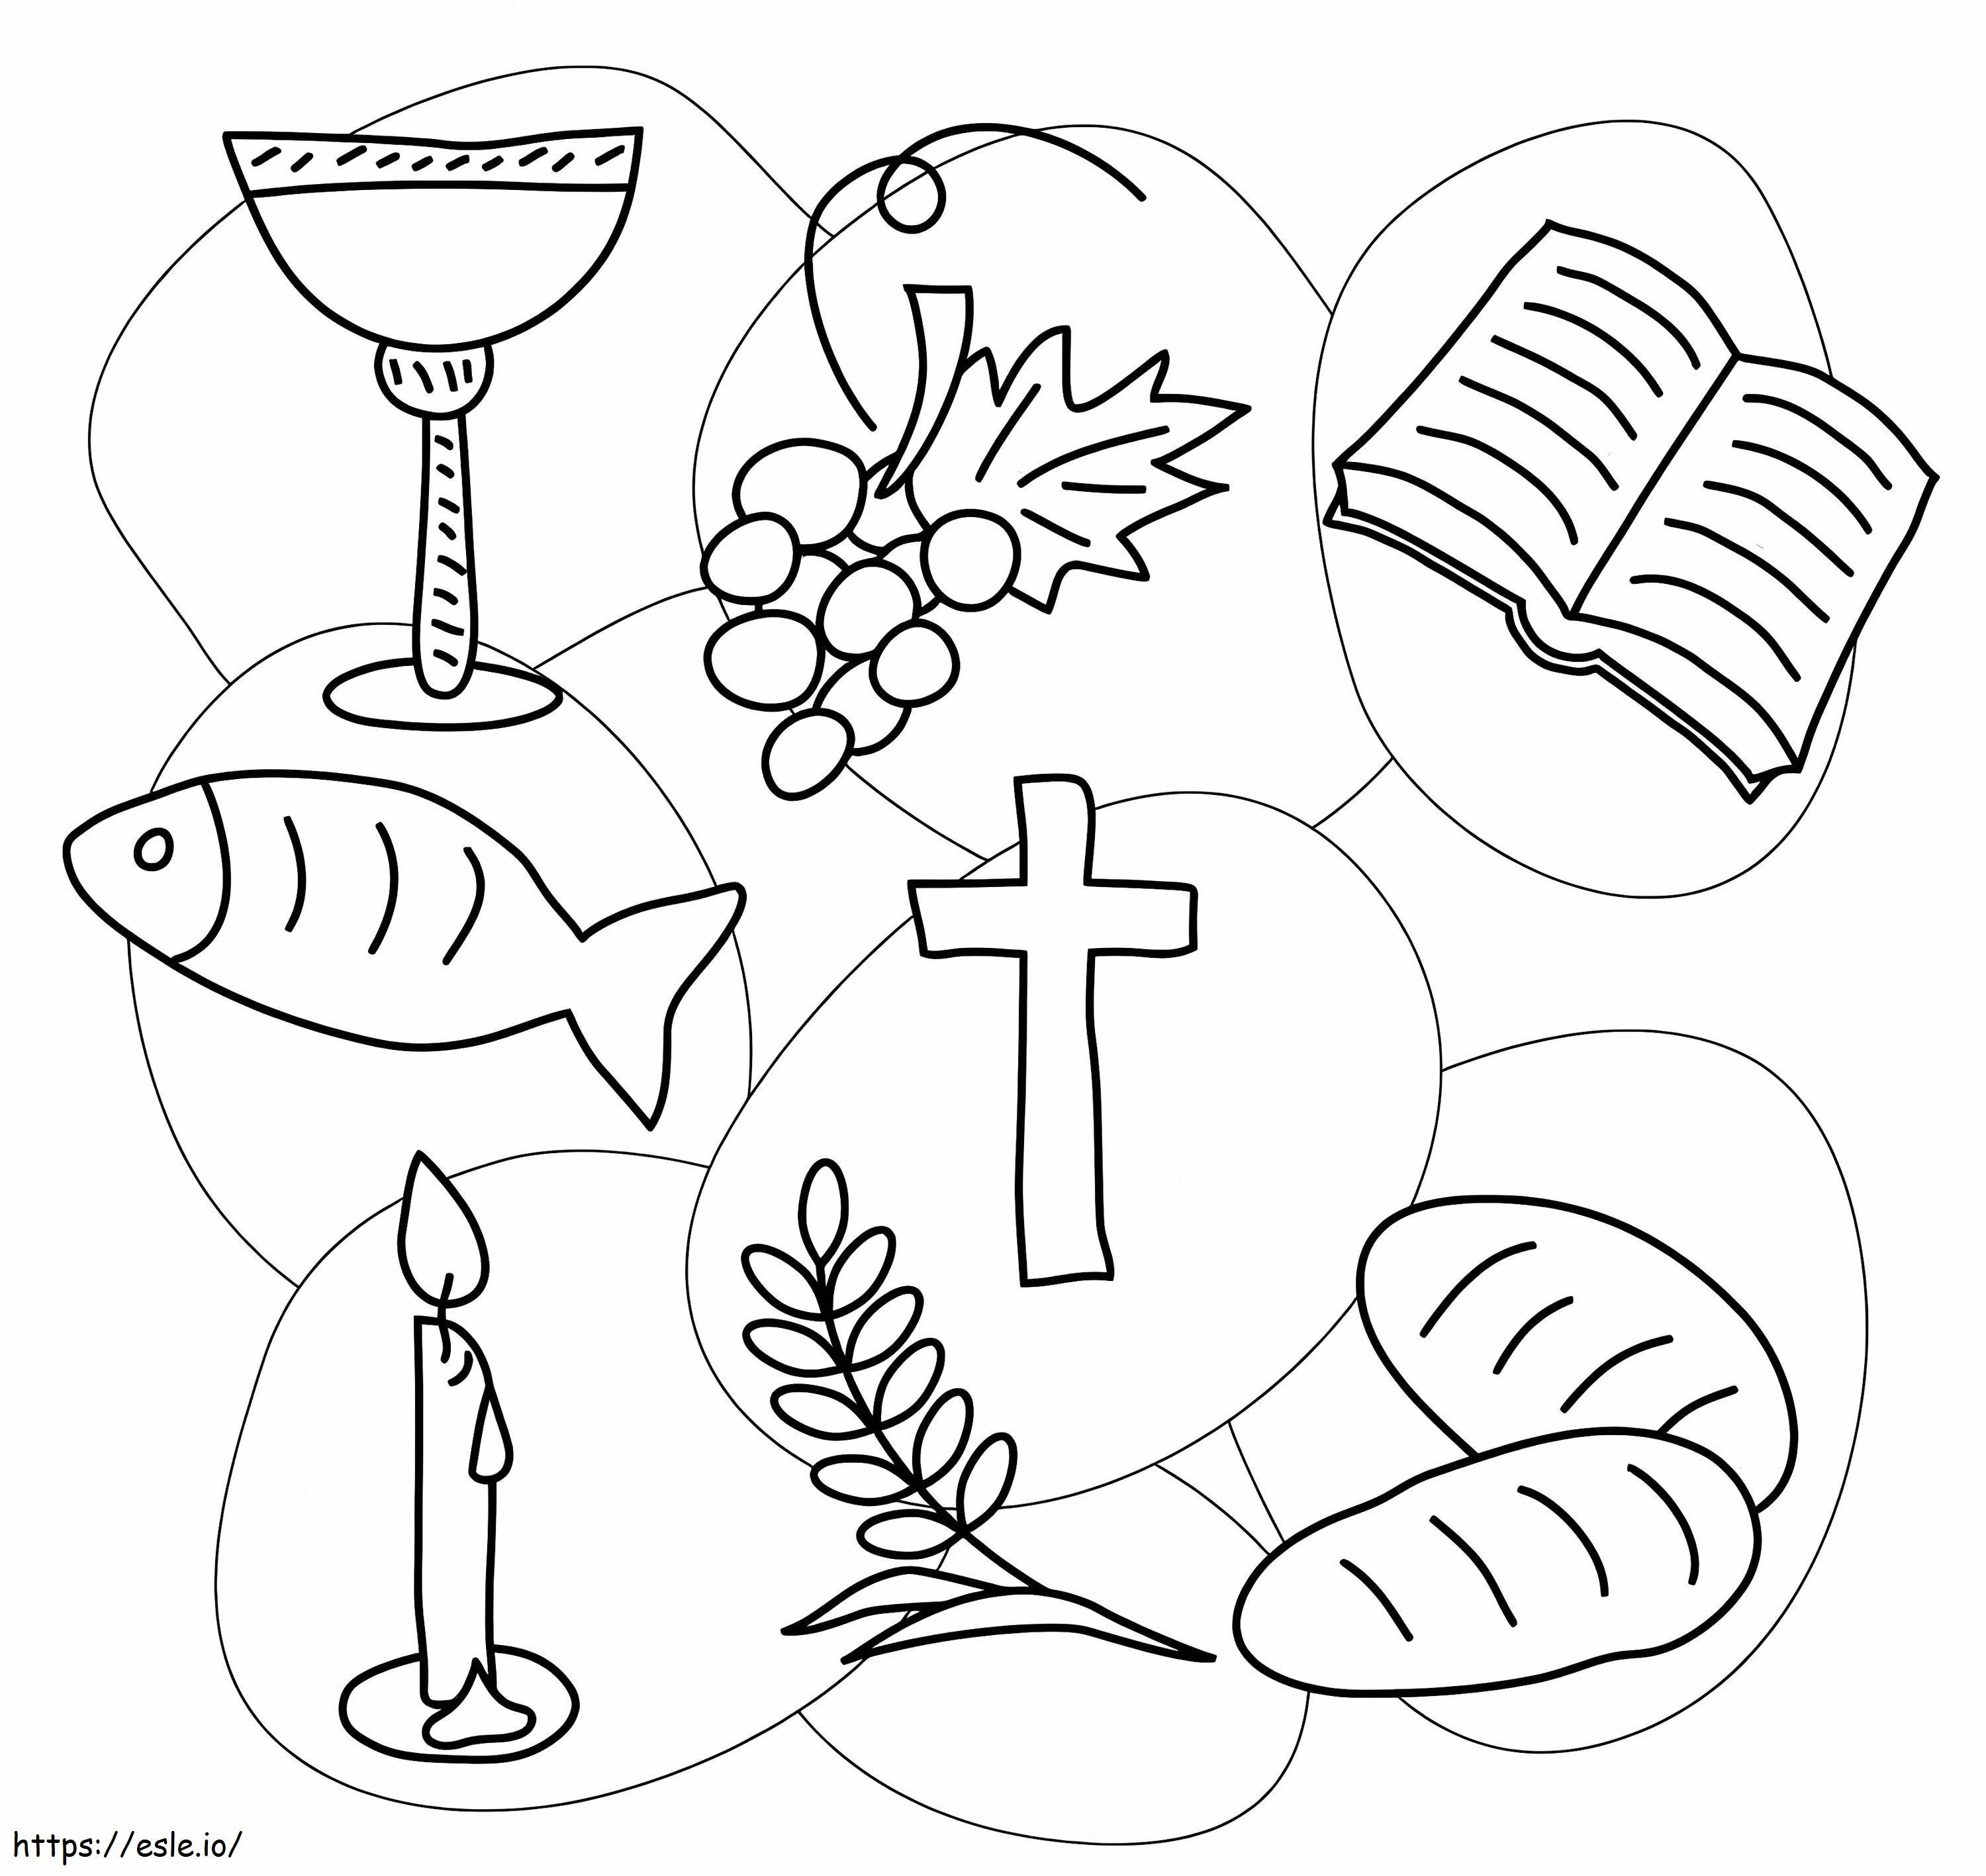 Communion 5 coloring page